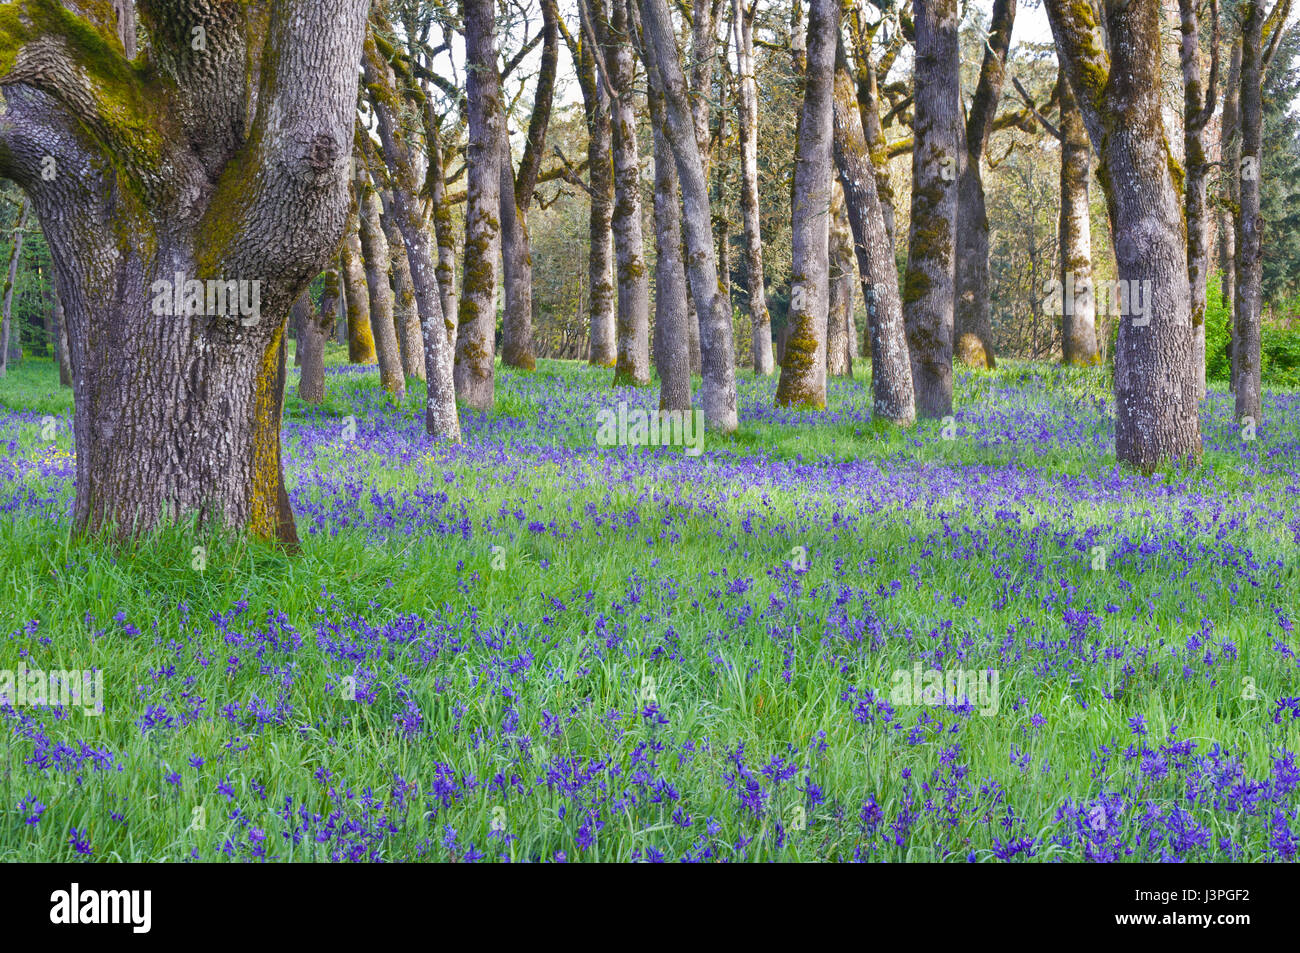 Blue Camas wildflowers blooming in a meadow among the oak trees Stock Photo